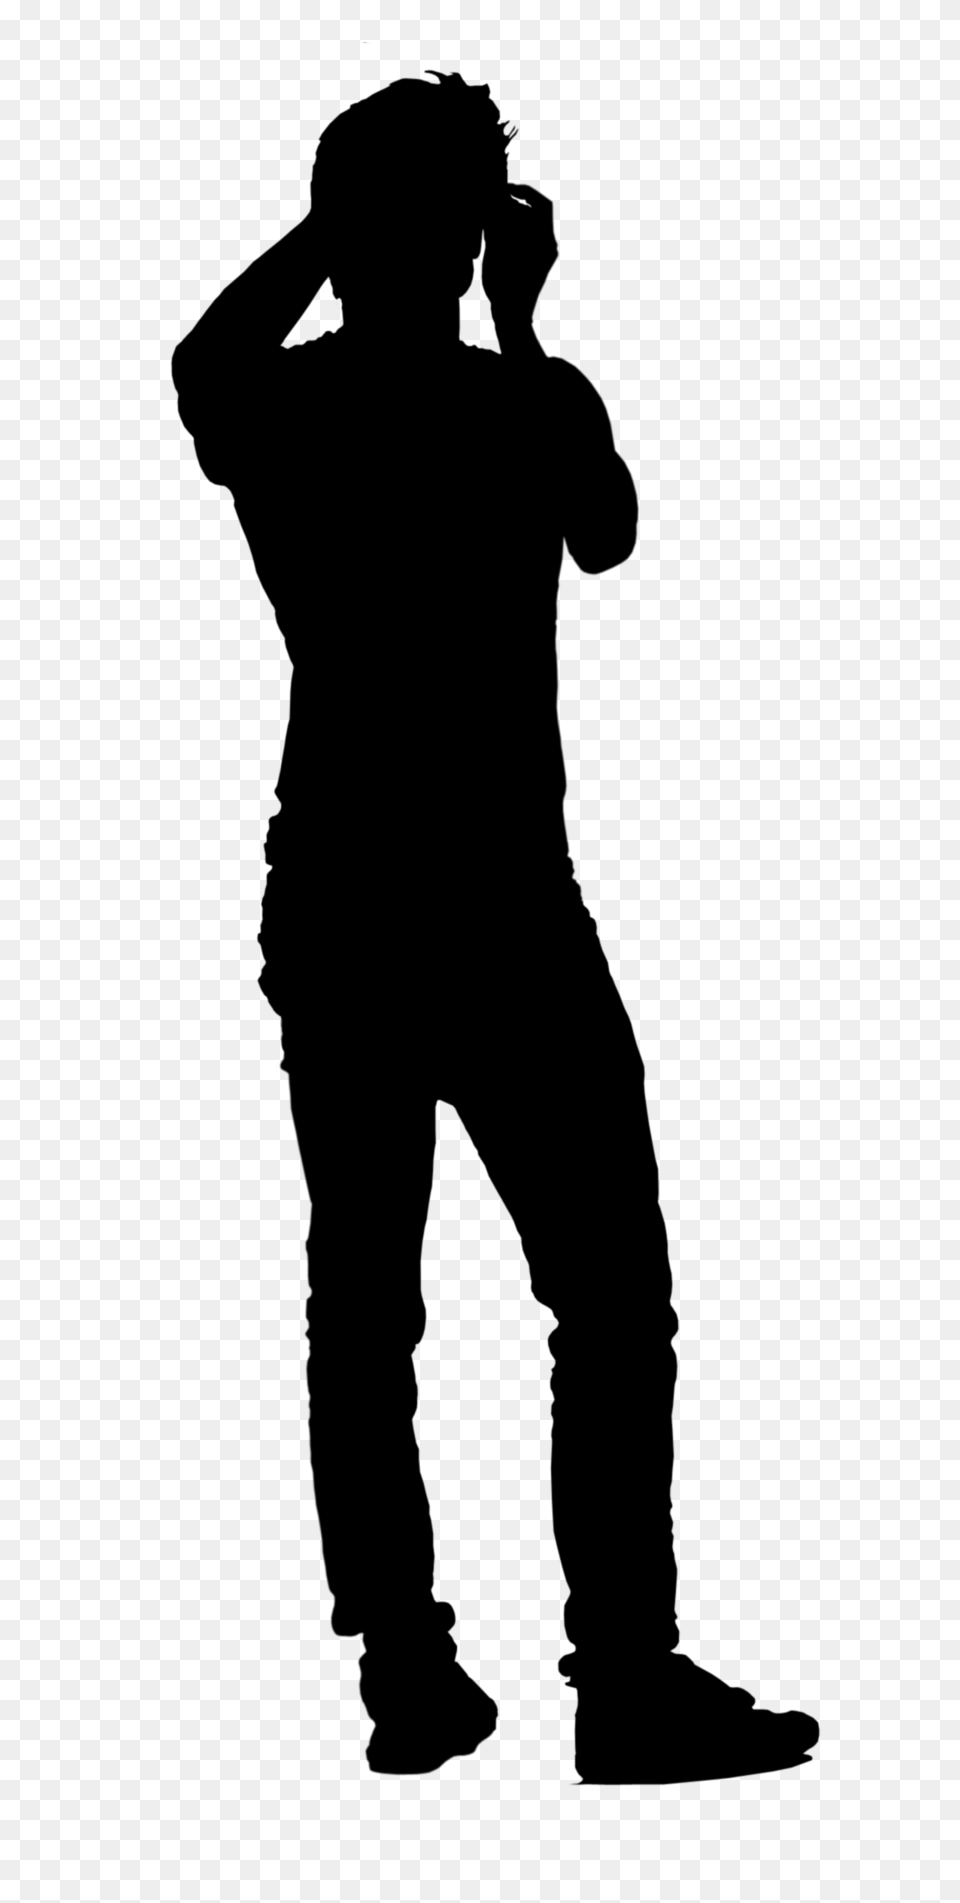 Silhouettes Image Free Transparent Png